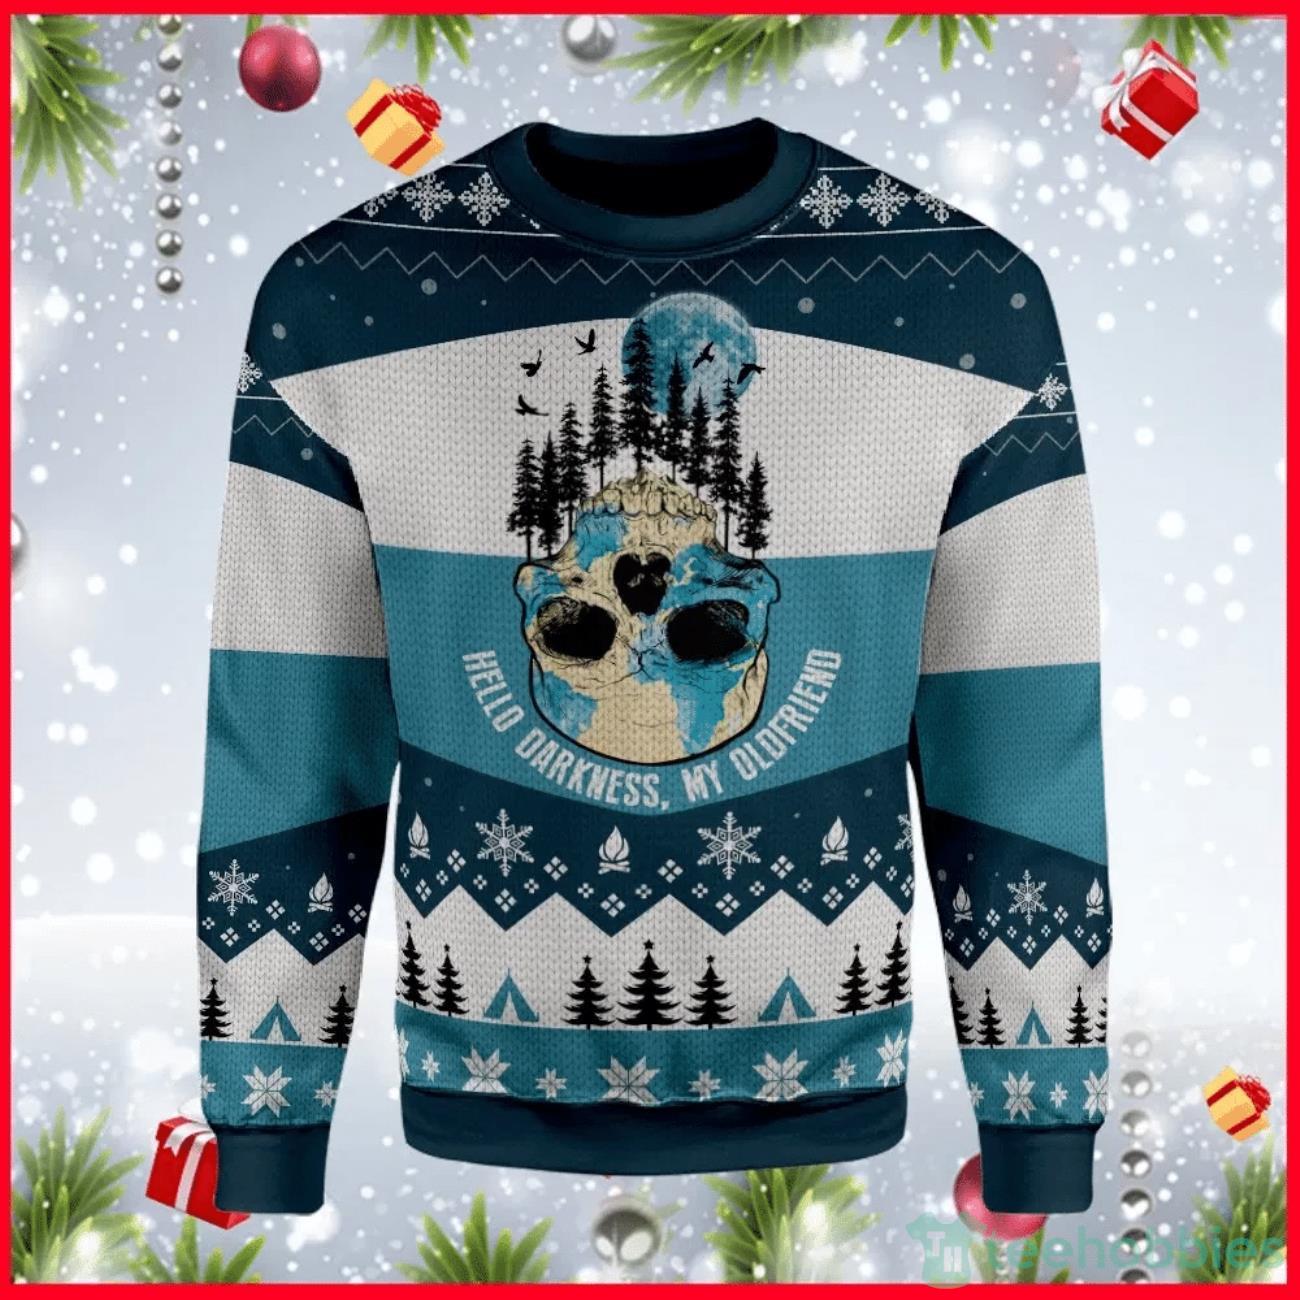 Hello Darkness My Old Friend Ugly Sweater For Christmas Product Photo 1